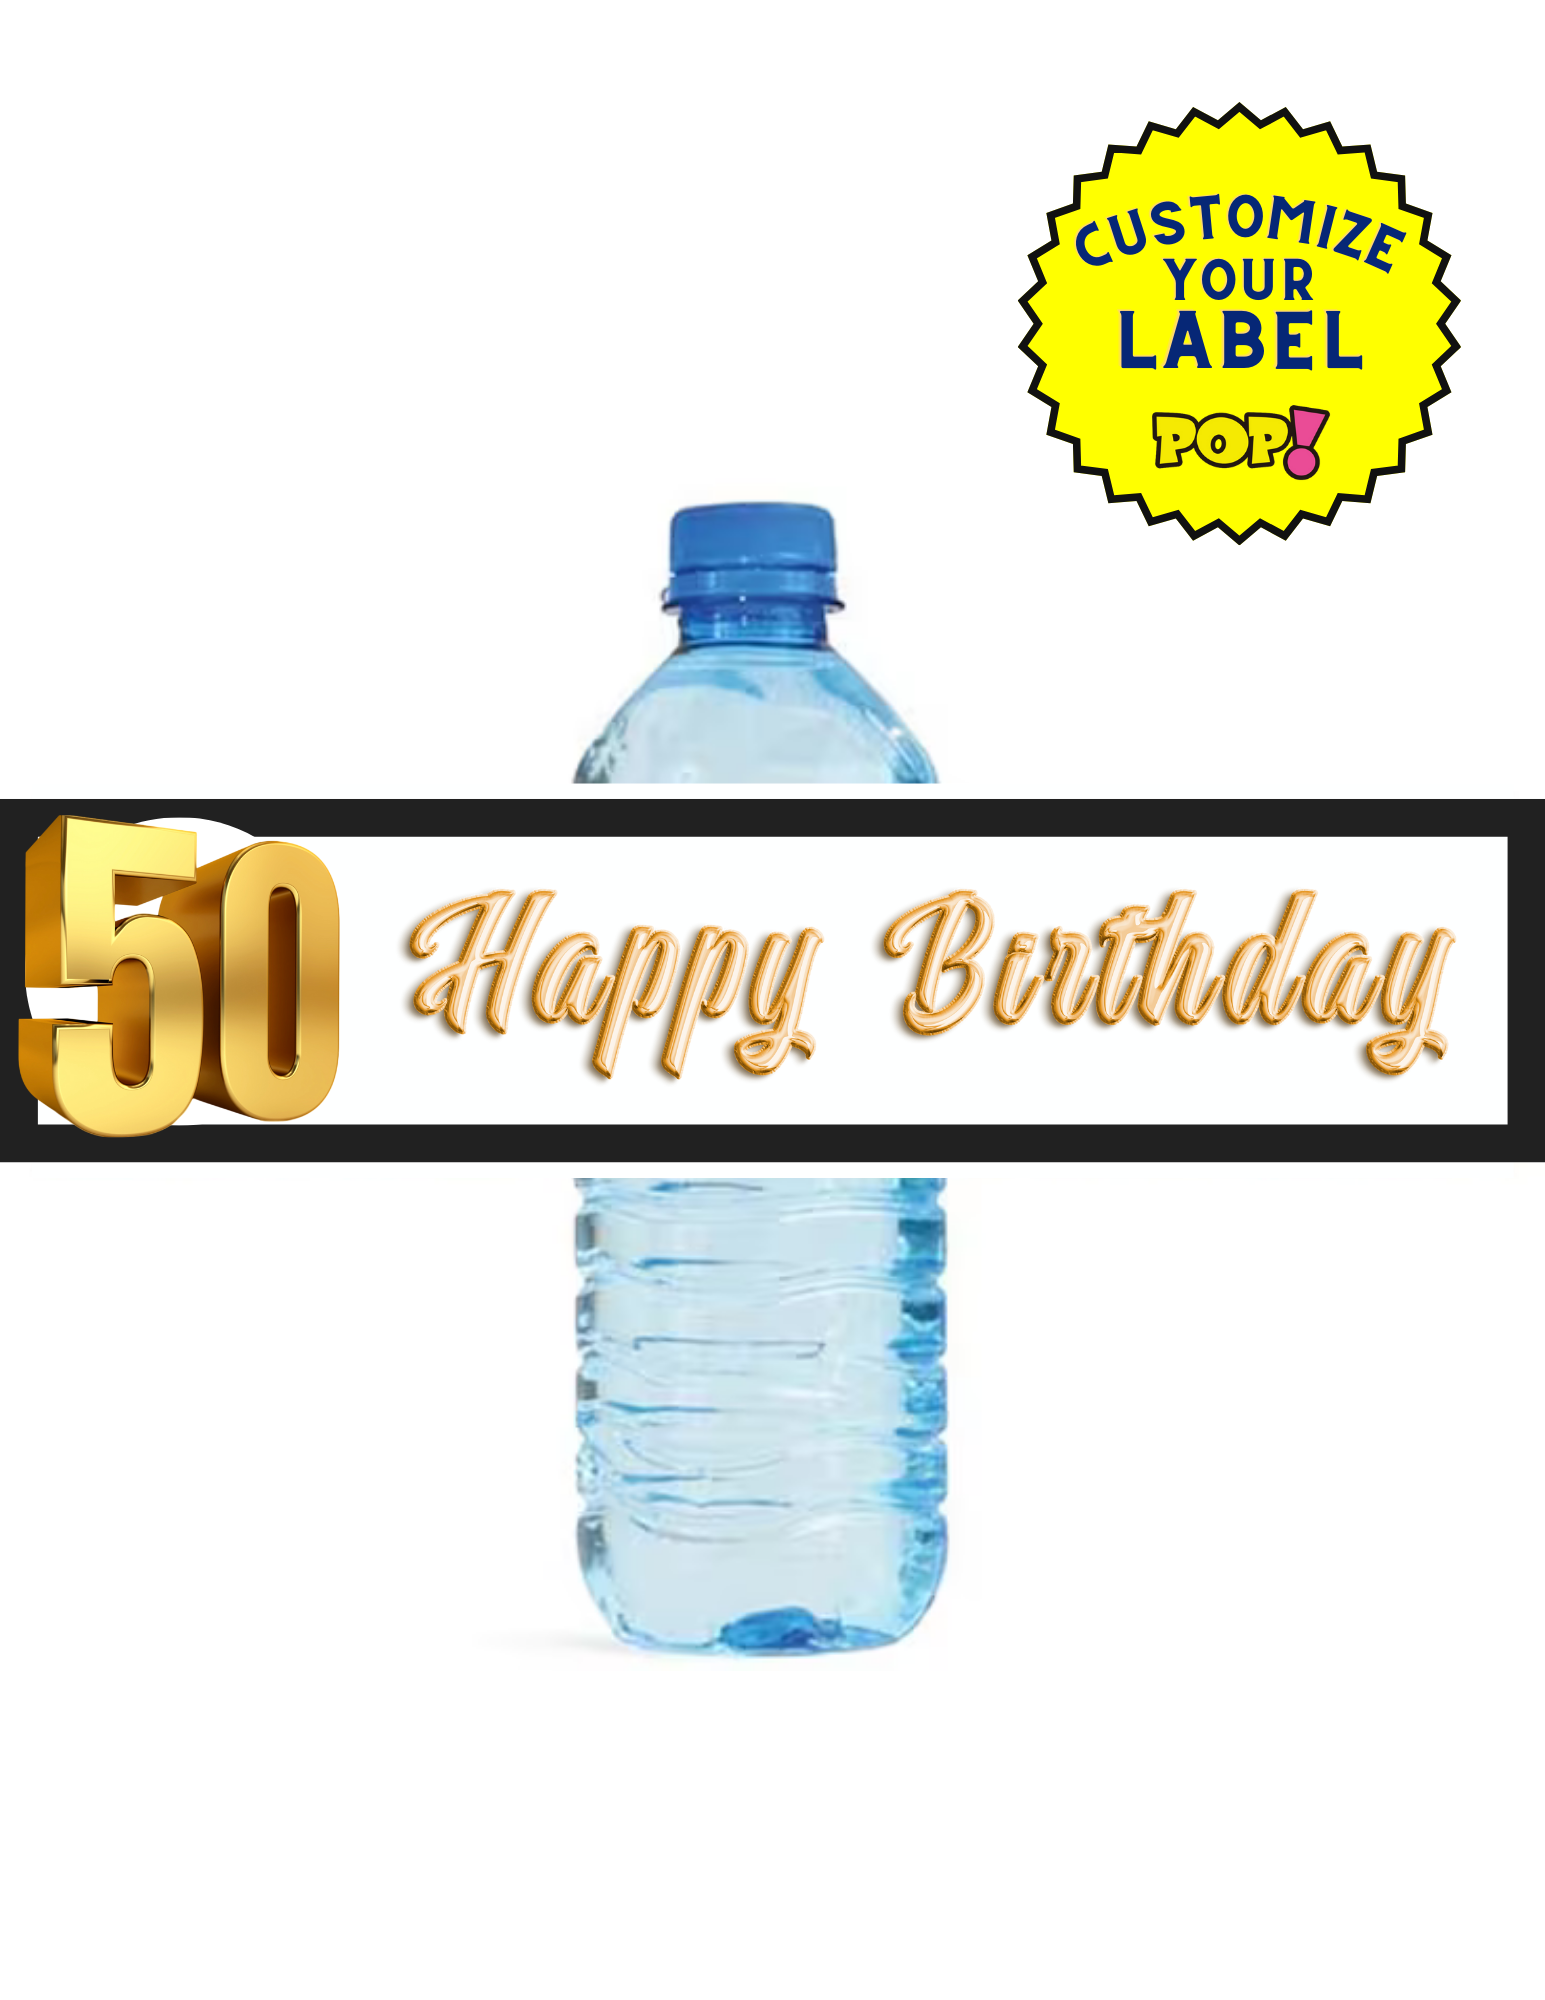 Custom Water Bottle Labels - Send Us Your image - POPPartyballoons